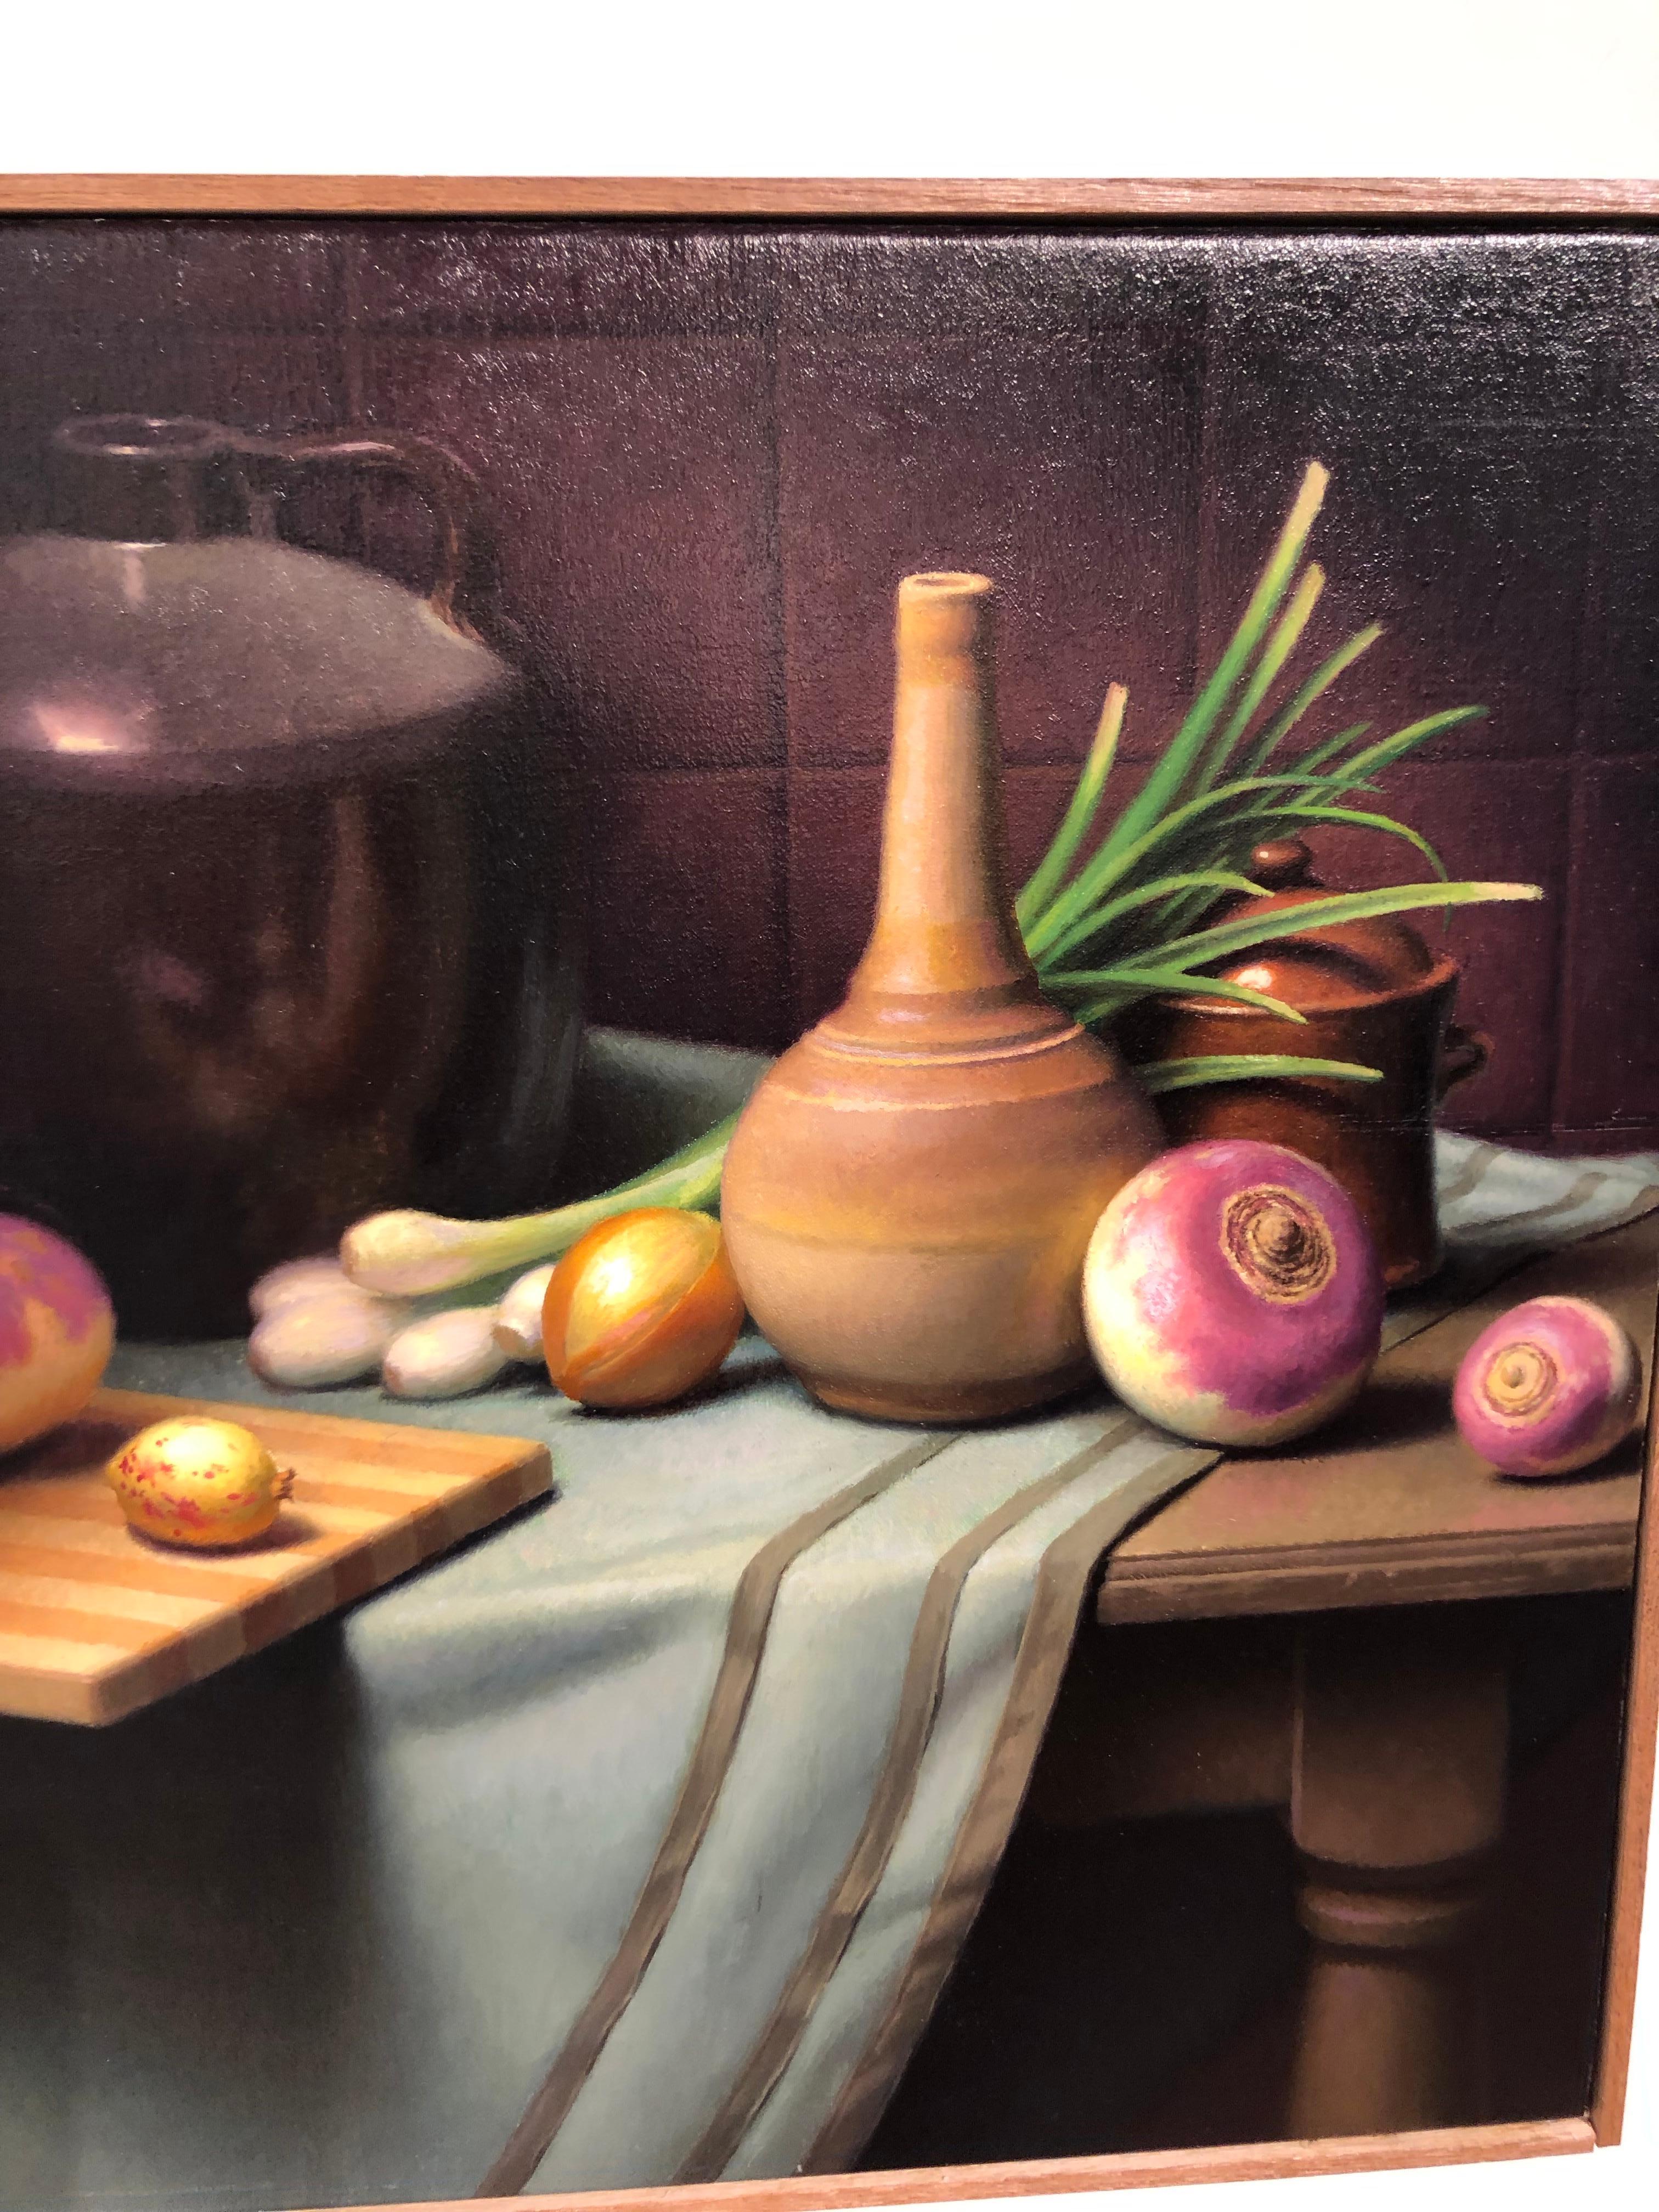 Contemporary Still Life with Turnips, Original Oil Painting on Canvas by Michael Chelich